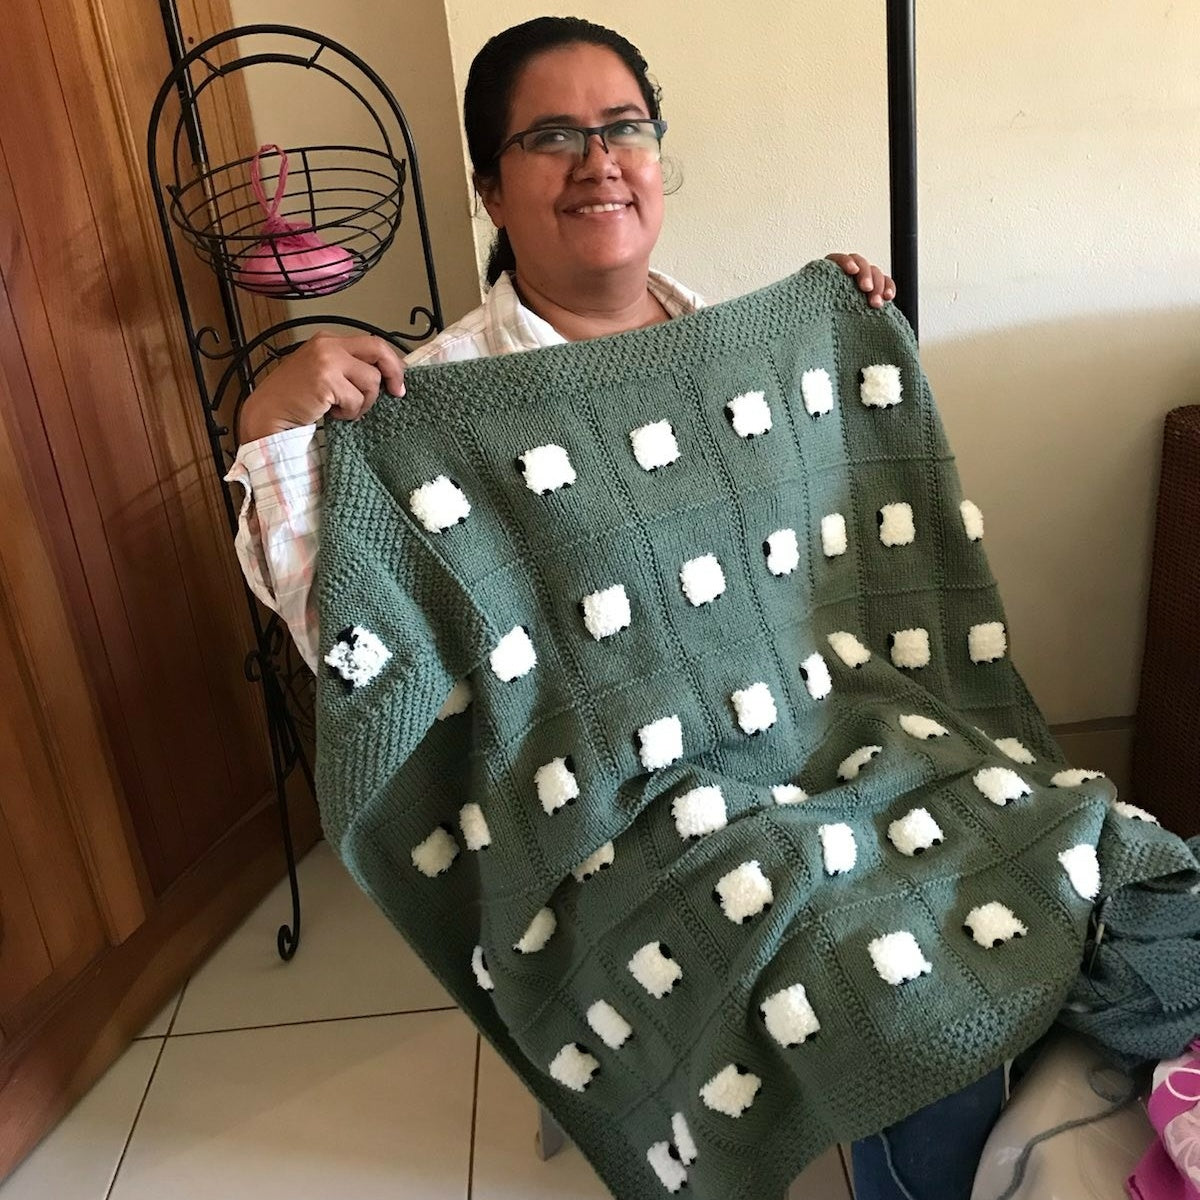 Cruz knitted this organic blanket twice our normal size, with 48 sheep instead of our normal 24 sheep. It came out perfect.